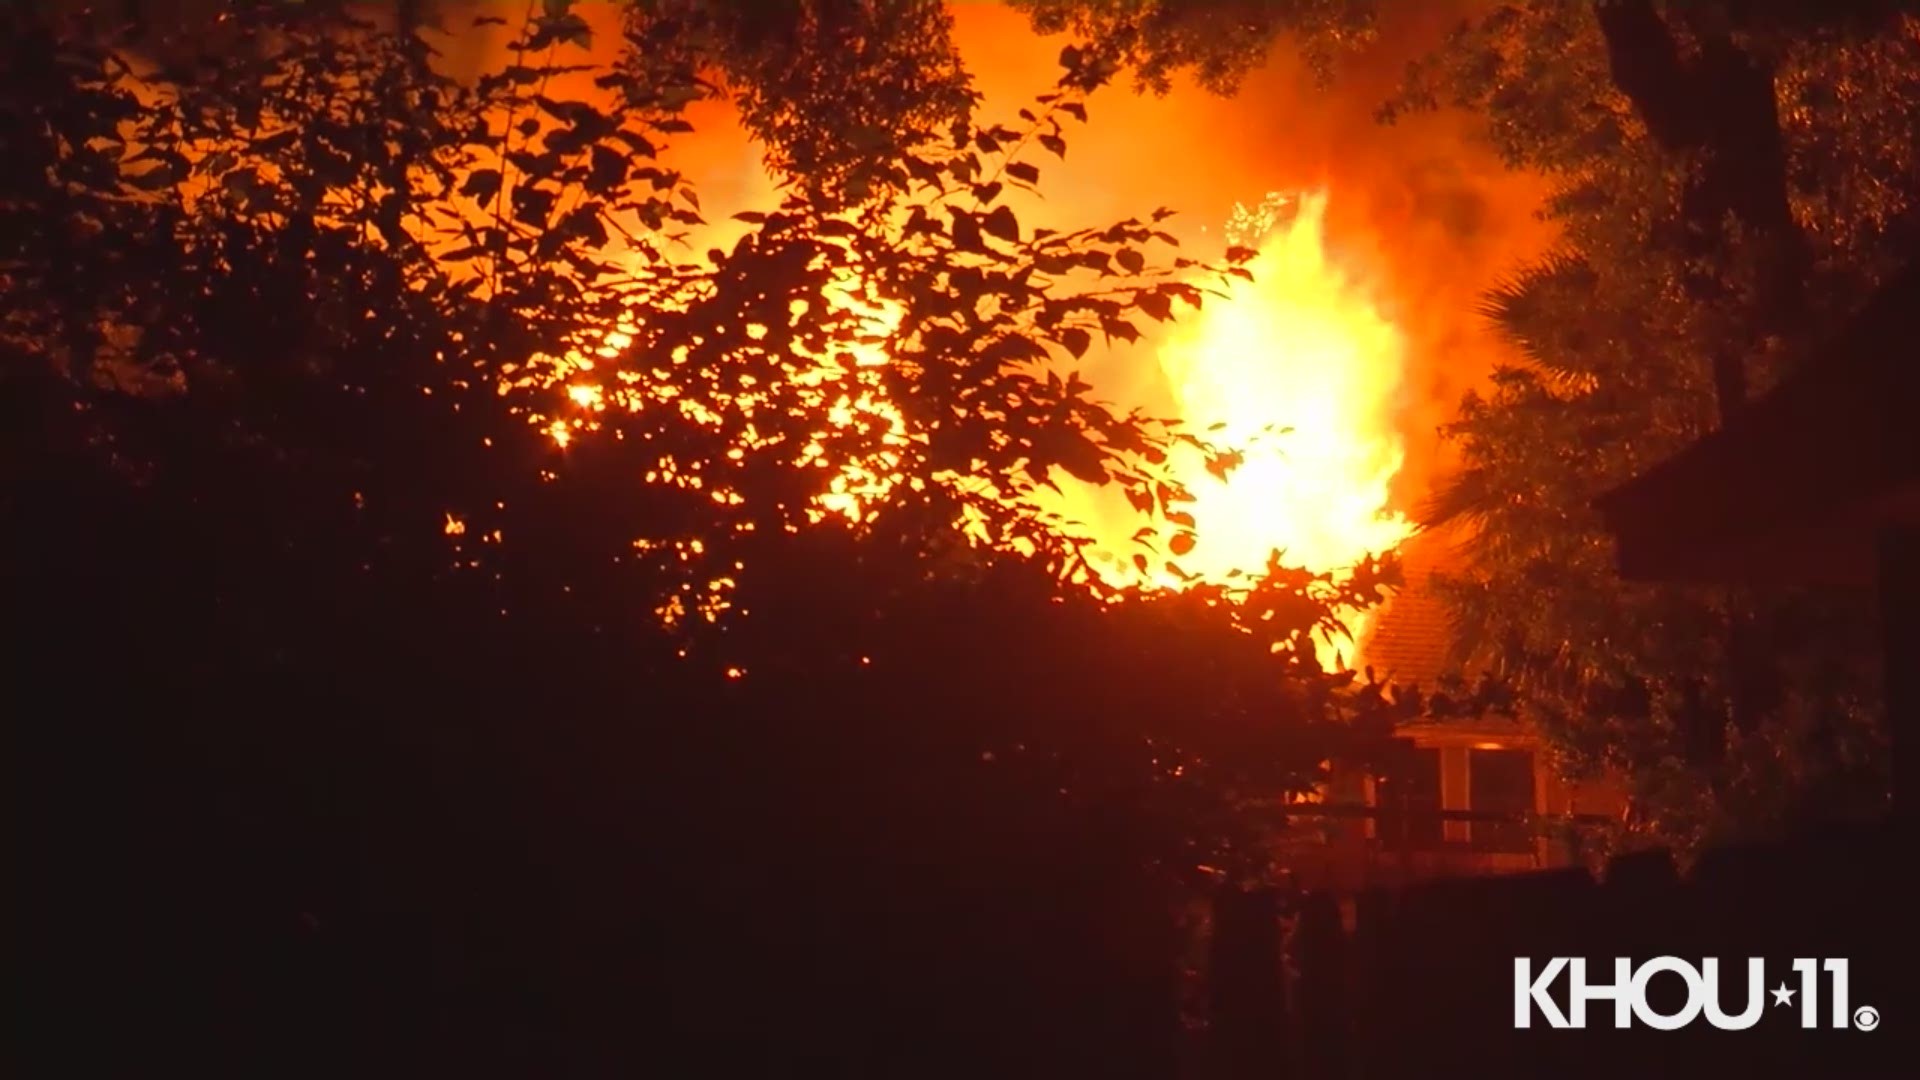 Firefighters battled a large fire that destroyed a home in northwest Houston overnight.